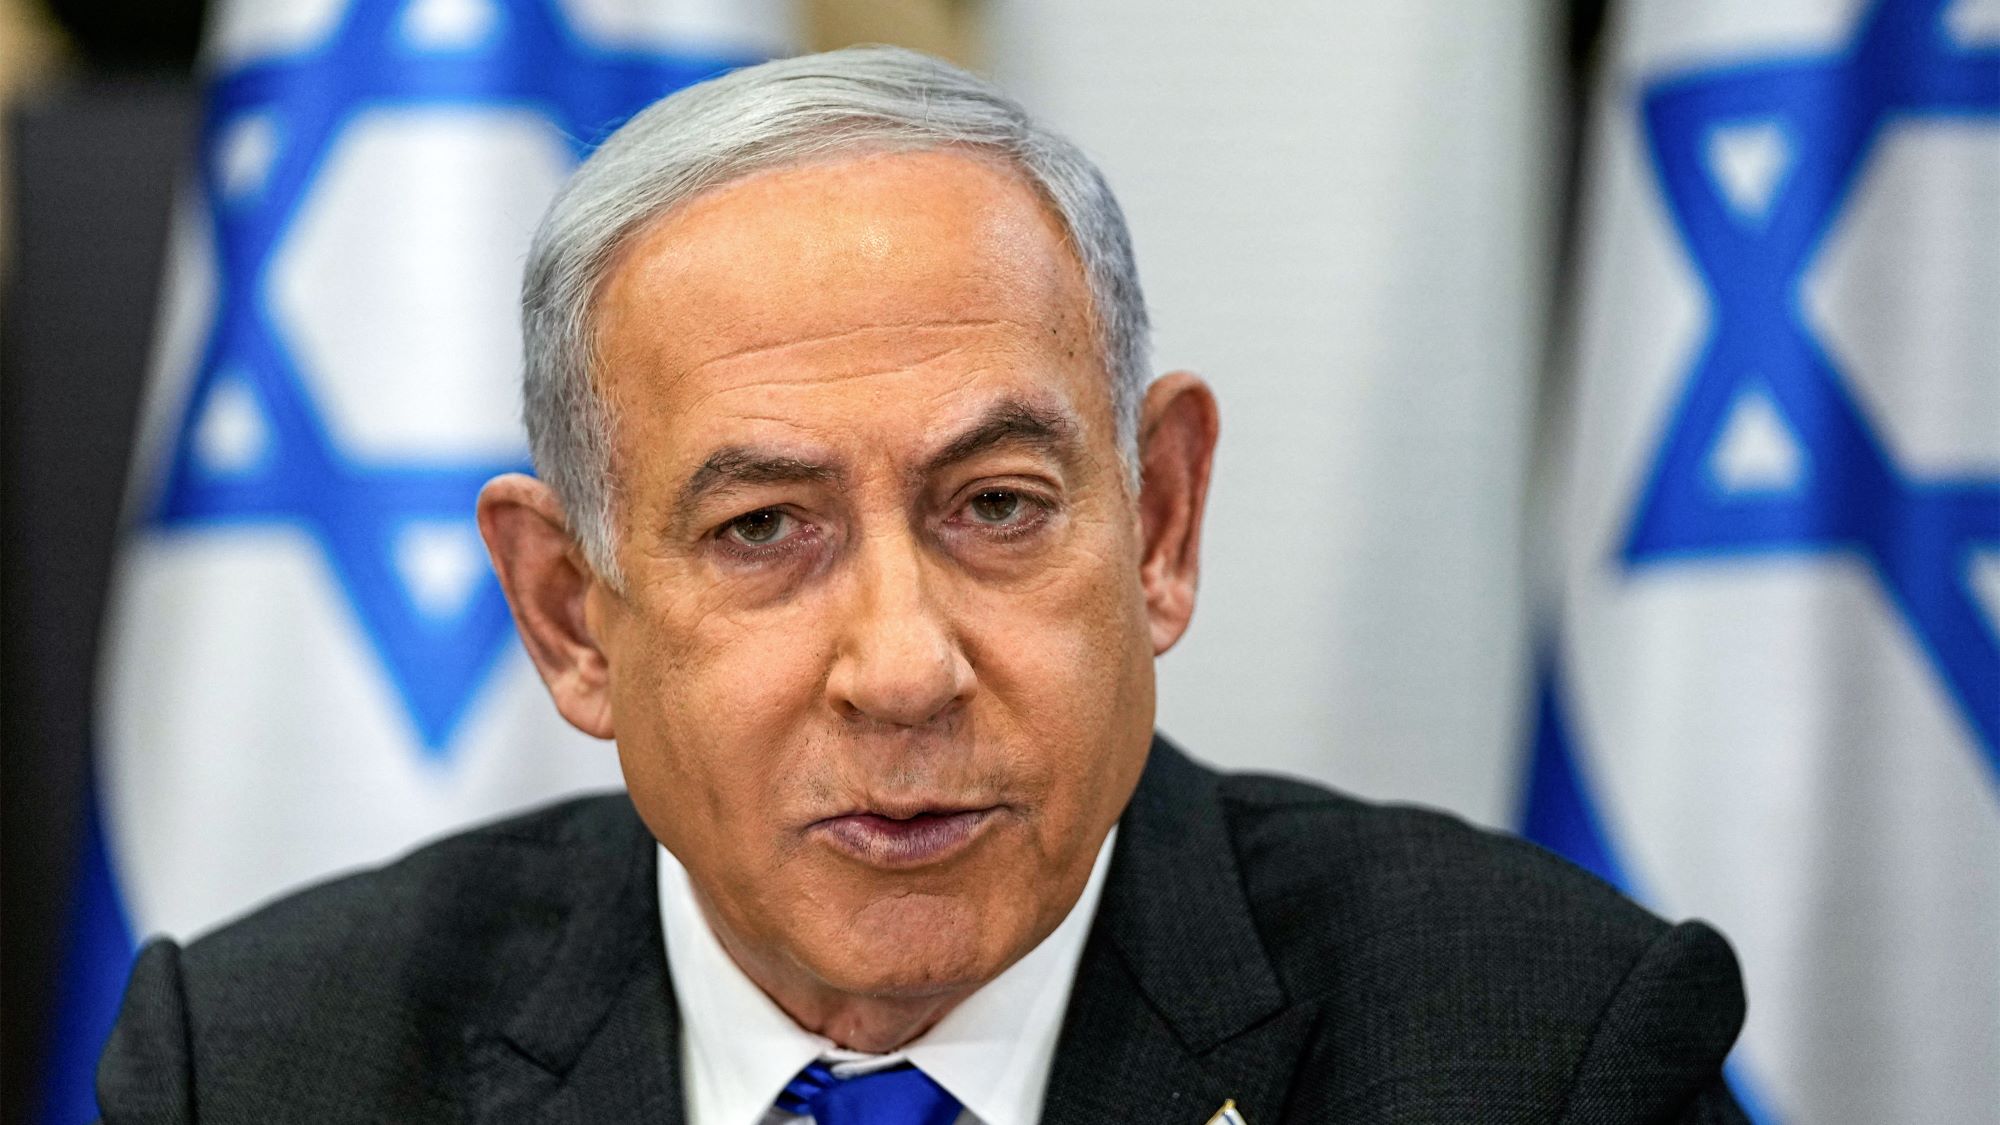 war-on-gaza:-netanyahu-looking-for-countries-‘to-absorb’-ethnically-cleansed-palestinians